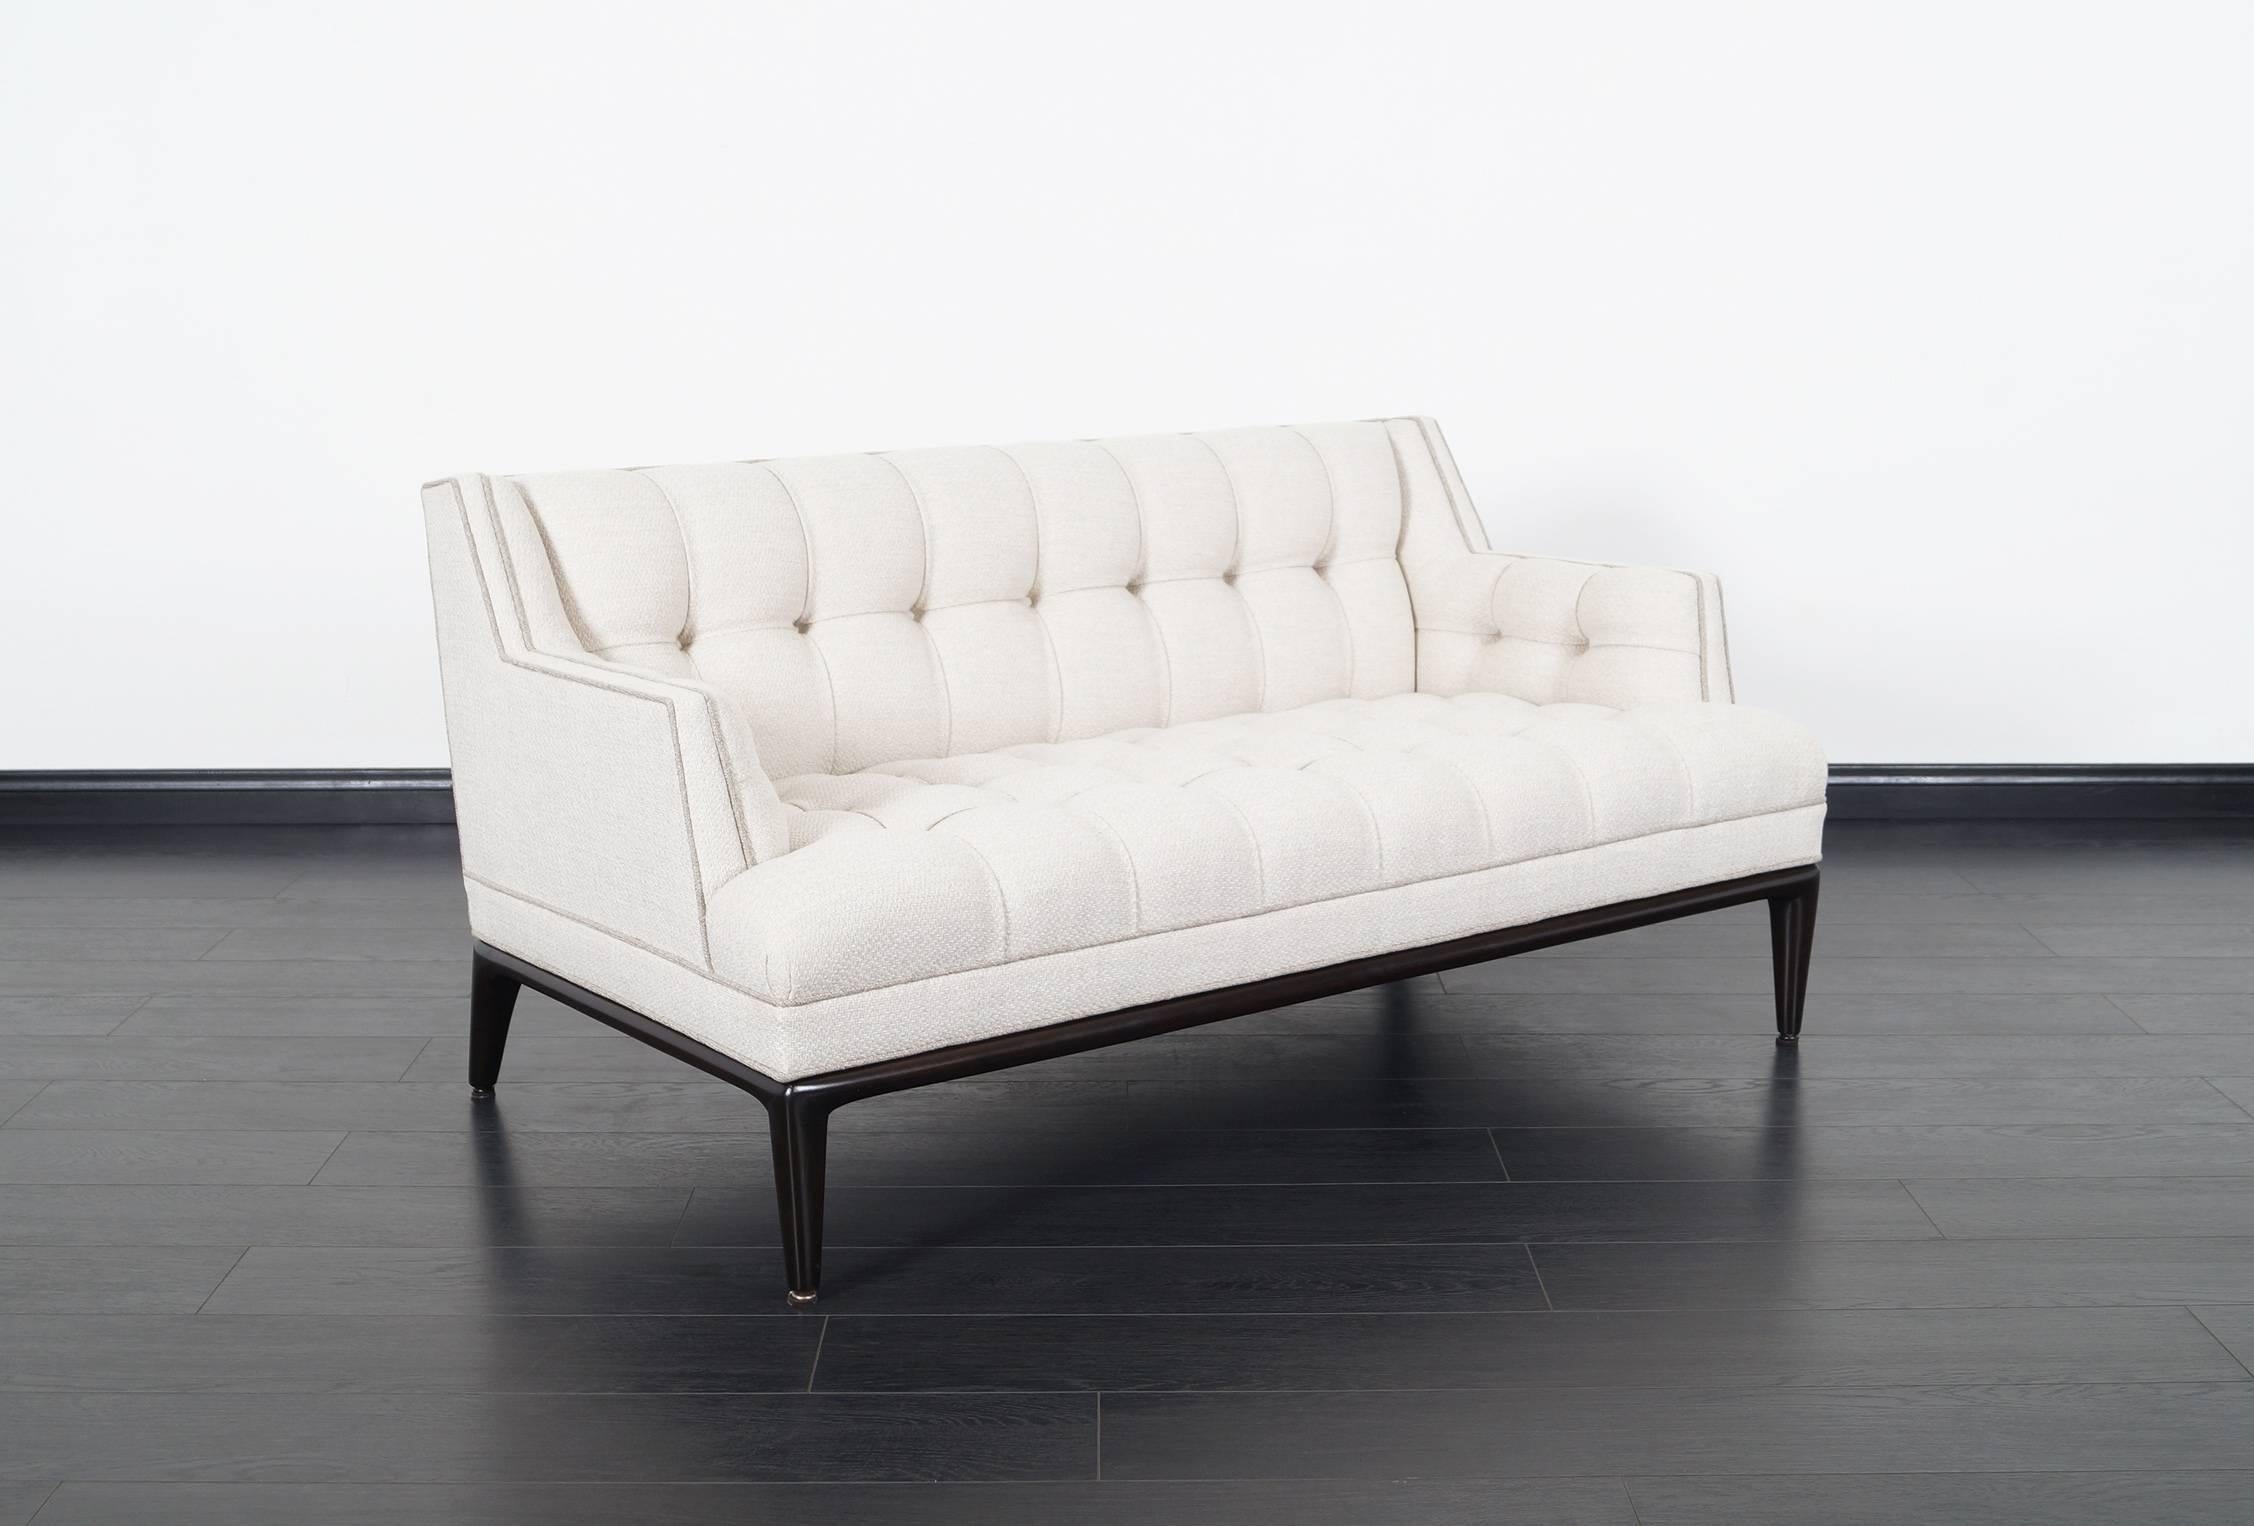 Beautiful biscuit tufted loveseat designed by Maurice Bailey for Monteverdi-Young. Exquisitely sculpted ebonized mahogany tapered legs. Retains original label.